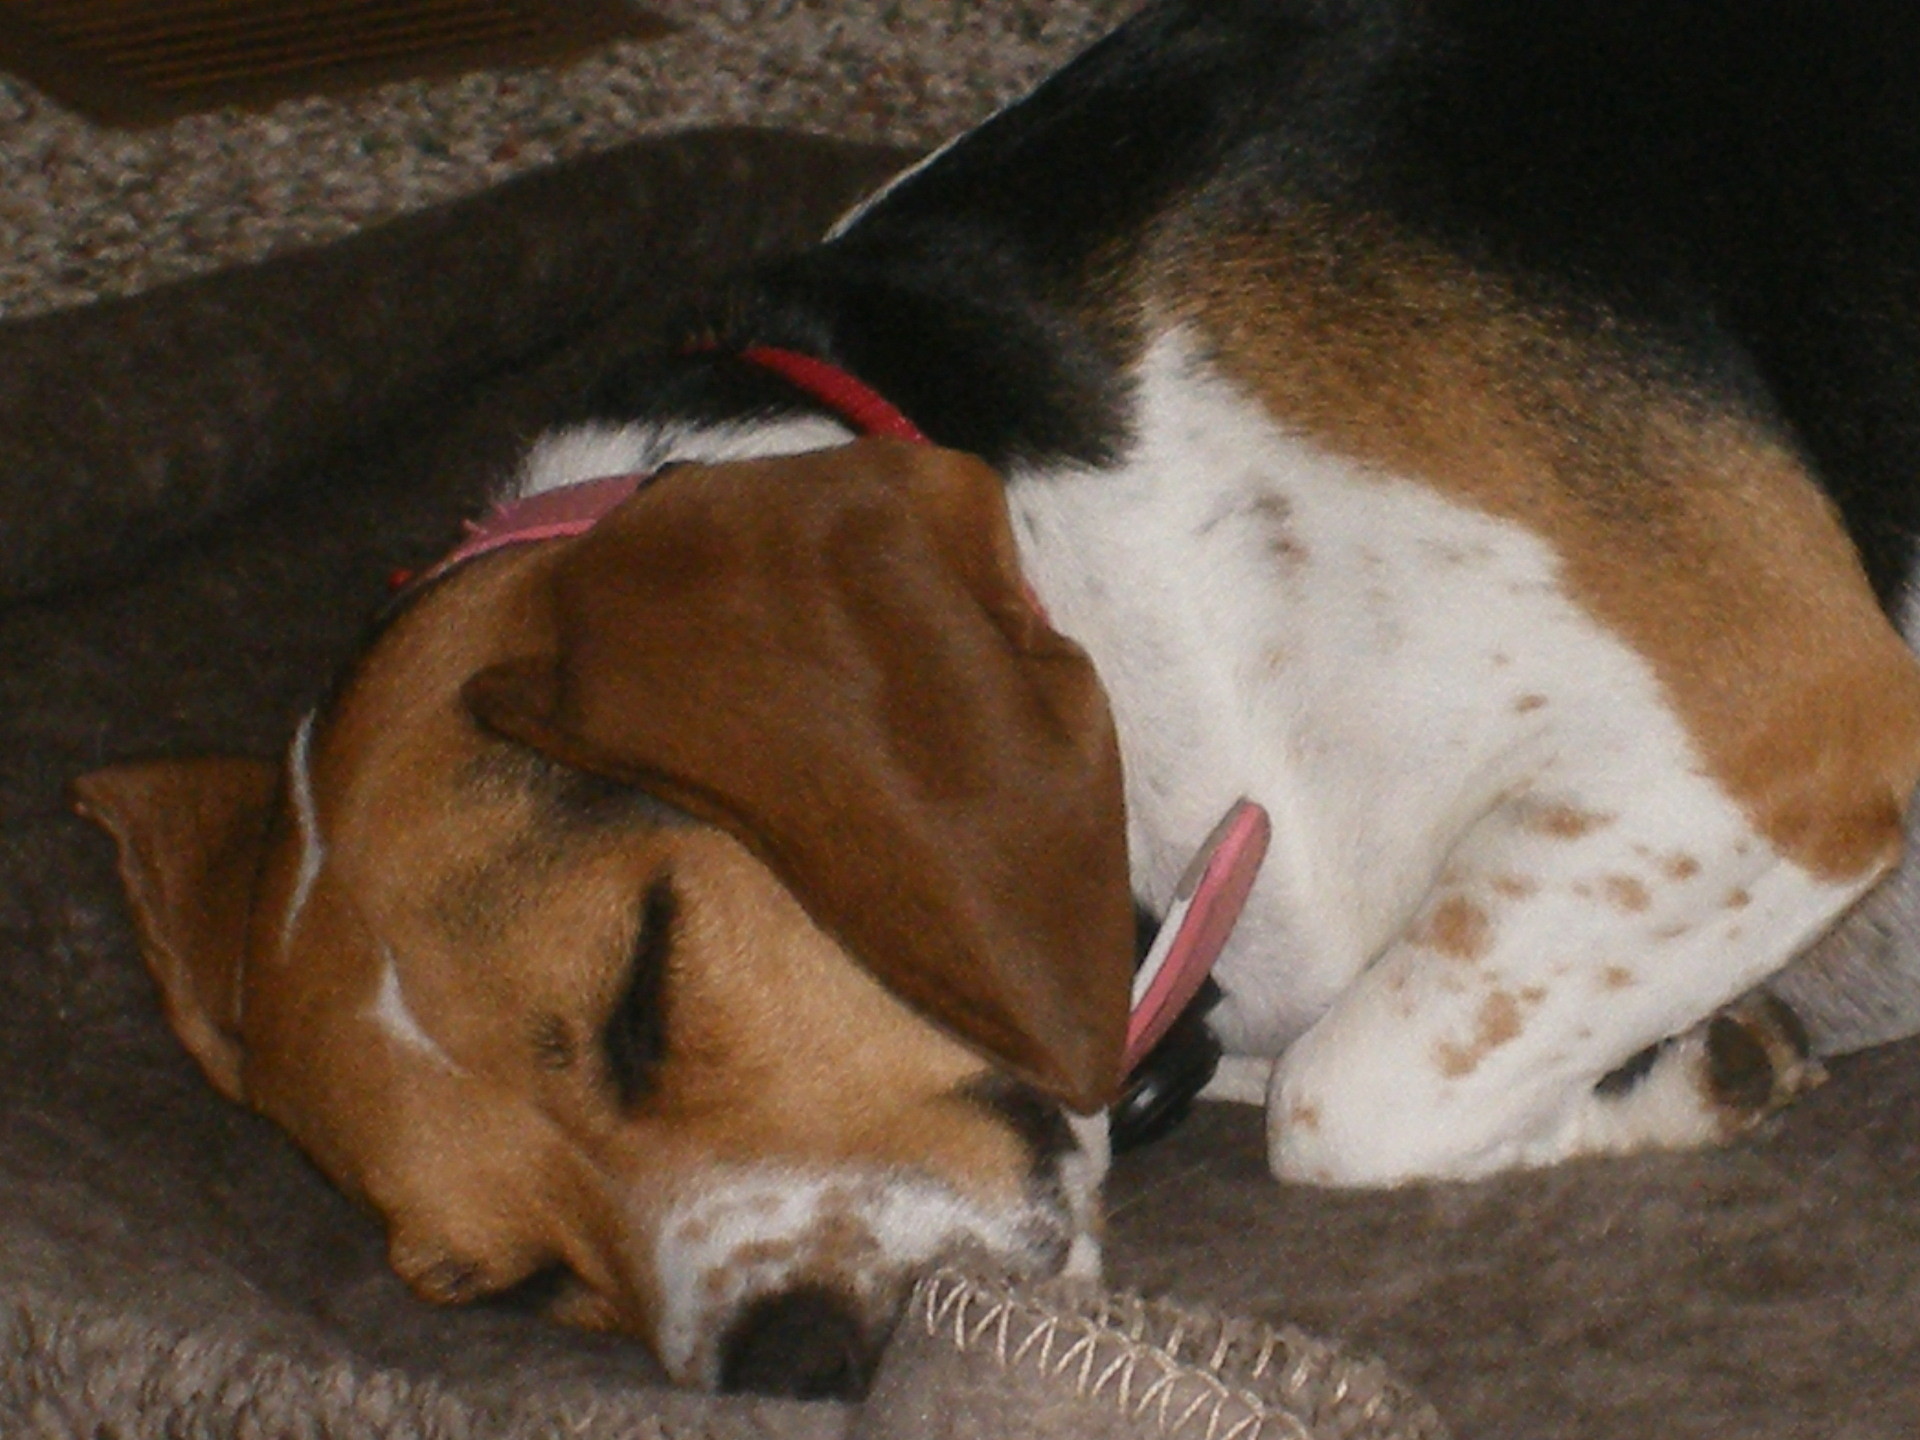 1920x1440 Beagles images Sleeping Beagle HD wallpaper and background photos